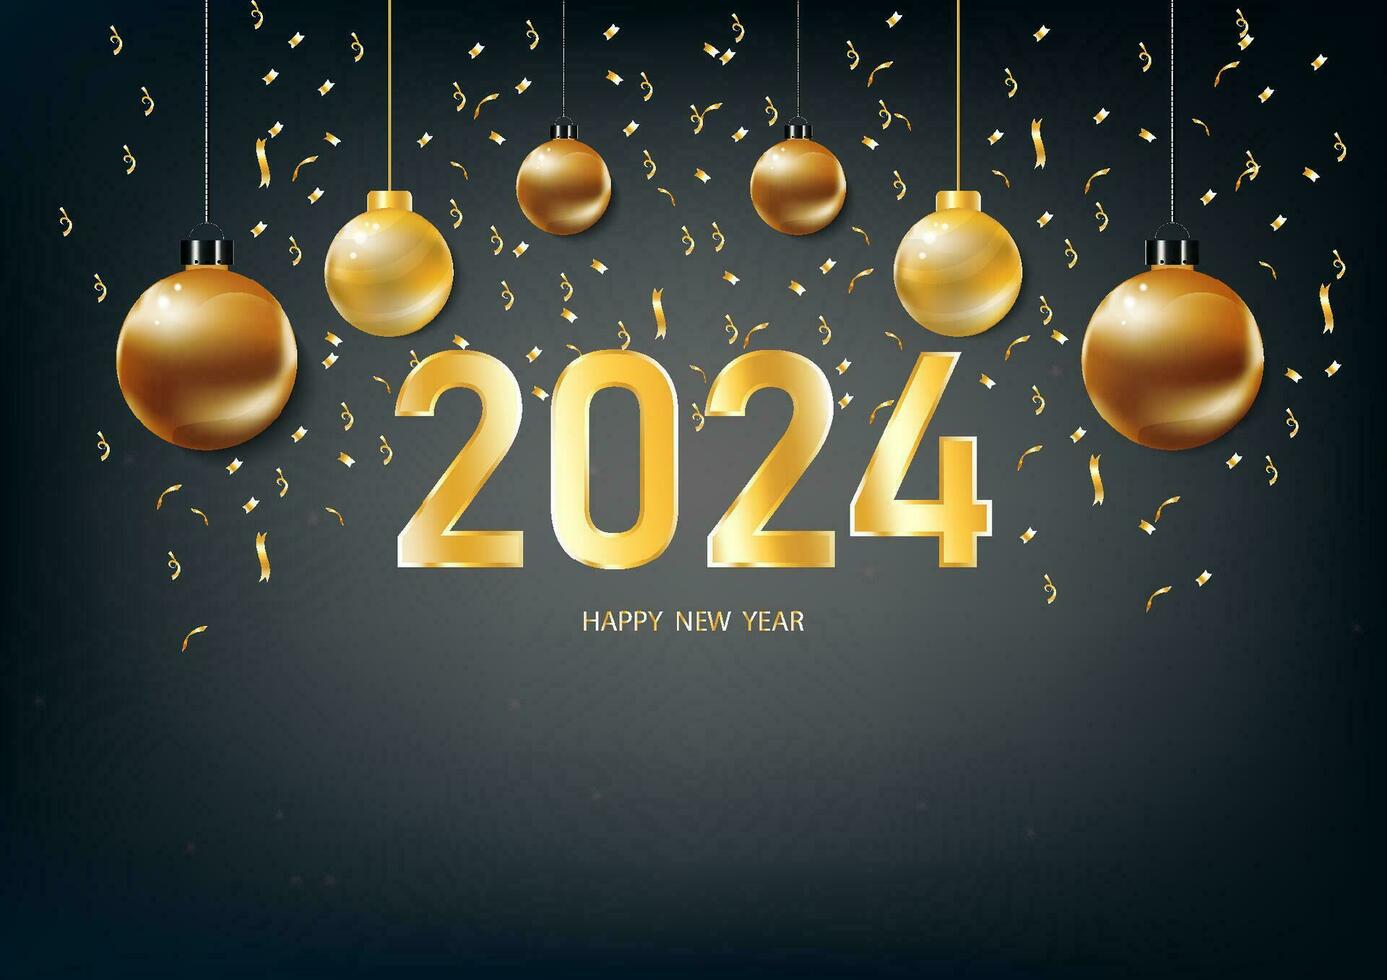 Happy new year 2024. with Golden numbers golden Christmas decorations and confetti on black blue background vector